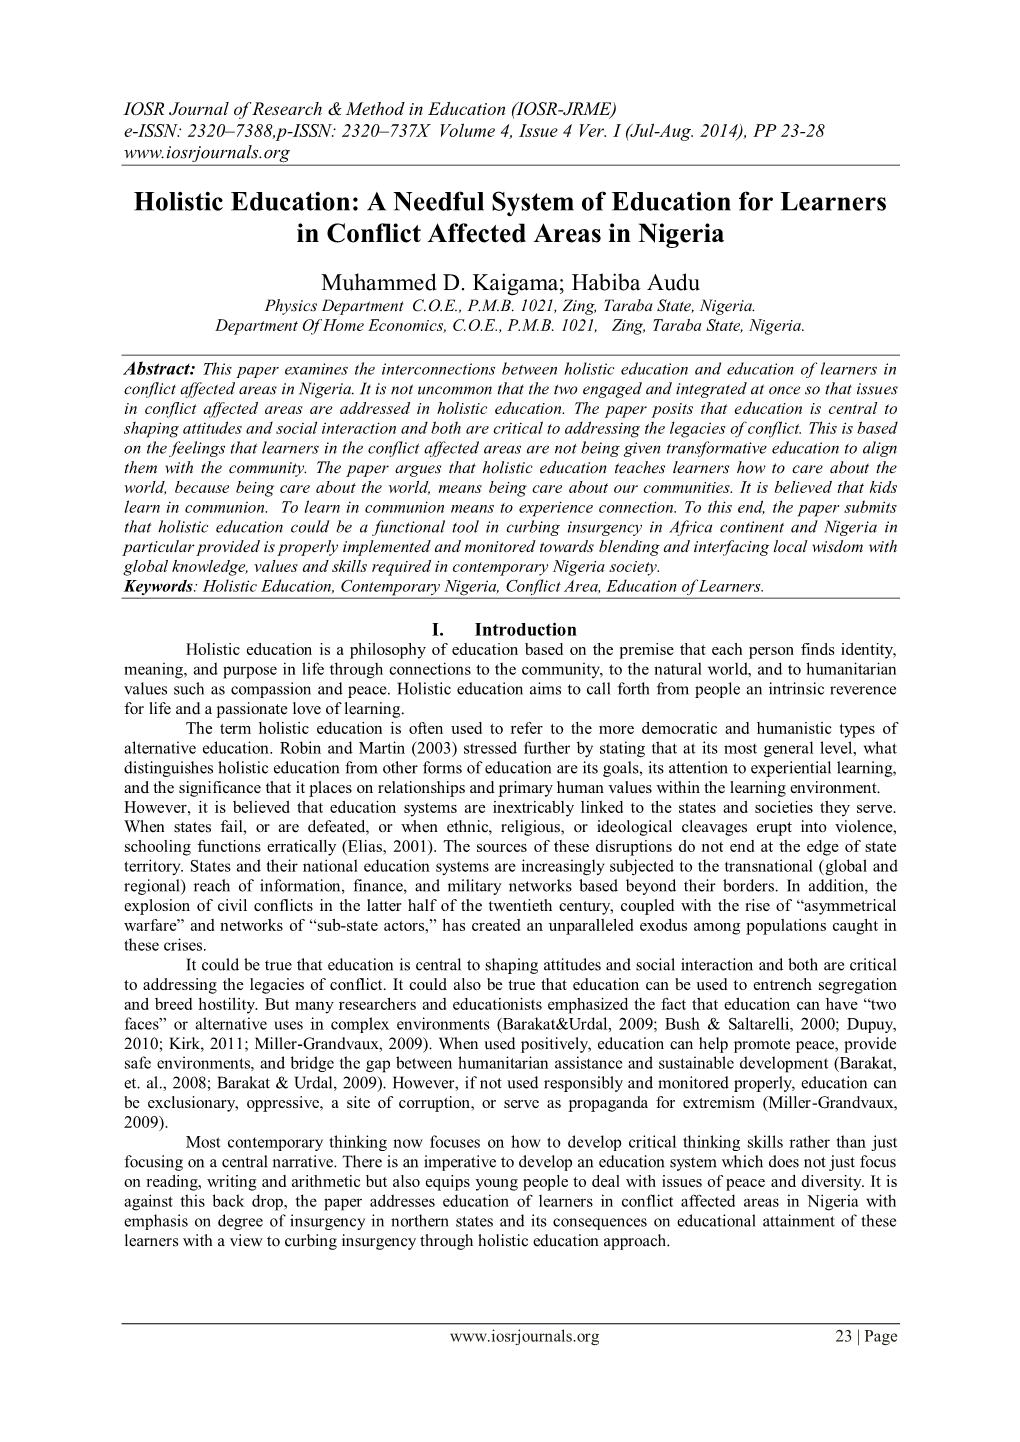 Holistic Education: a Needful System of Education for Learners in Conflict Affected Areas in Nigeria